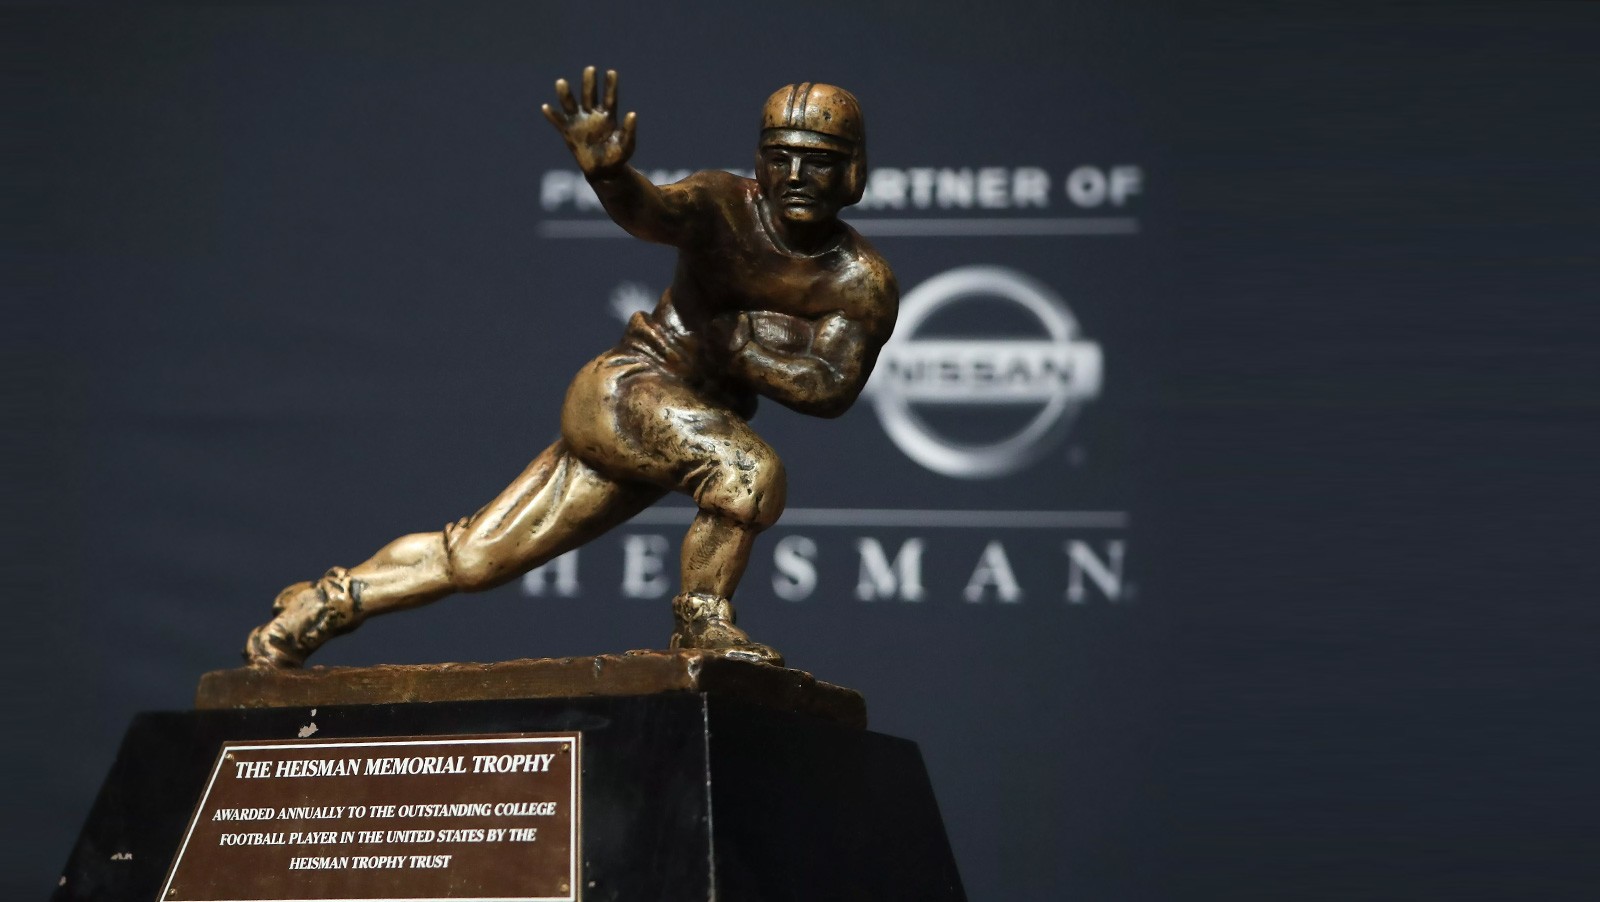 Odds on who wins the Heisman Trophy this season?